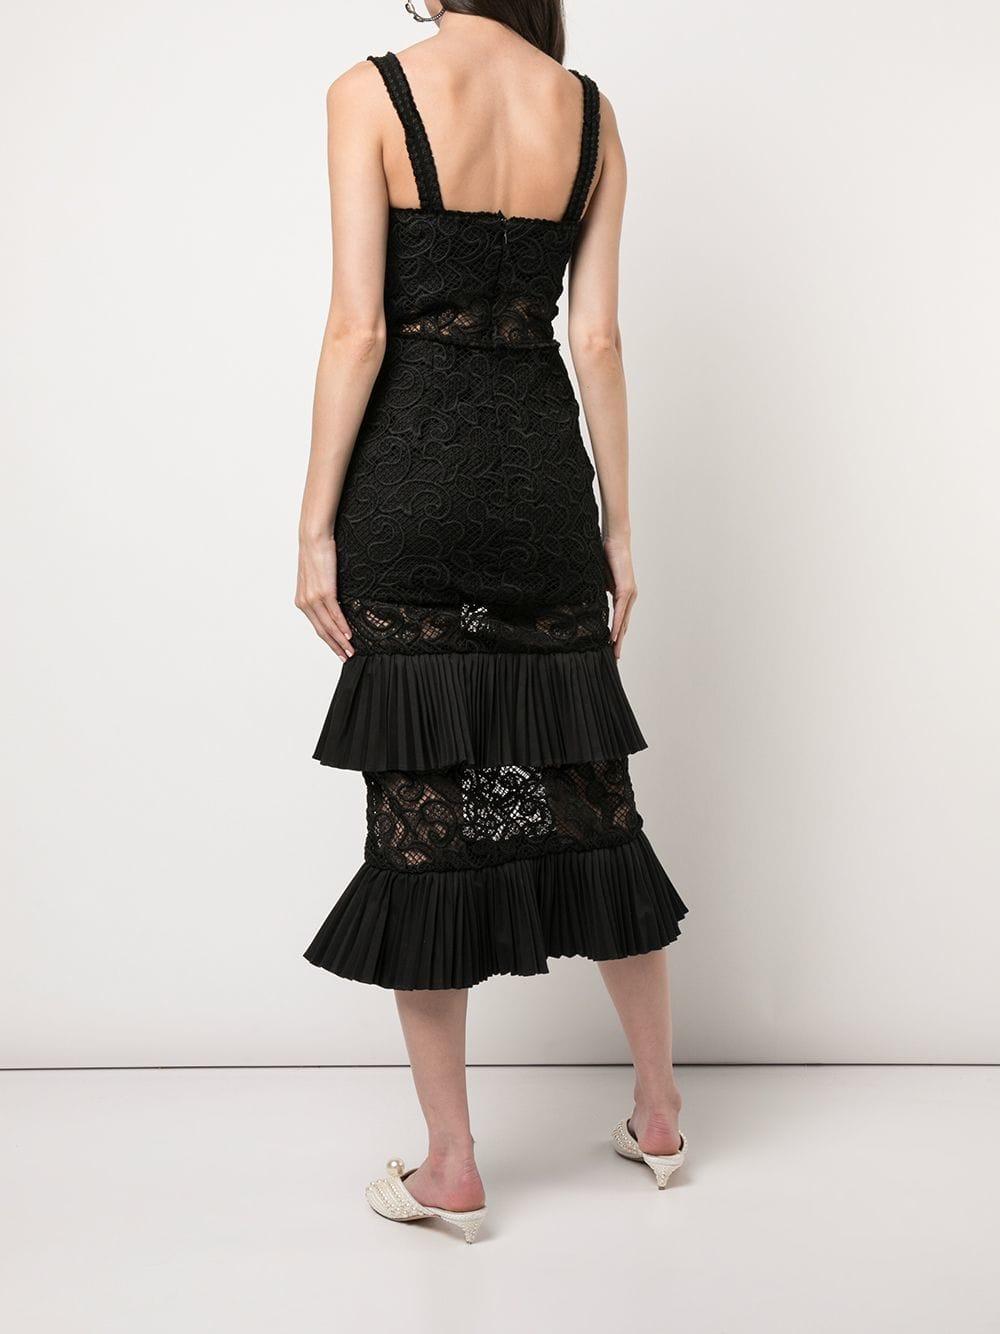 alexis lyssa tiered ruffle lace dress